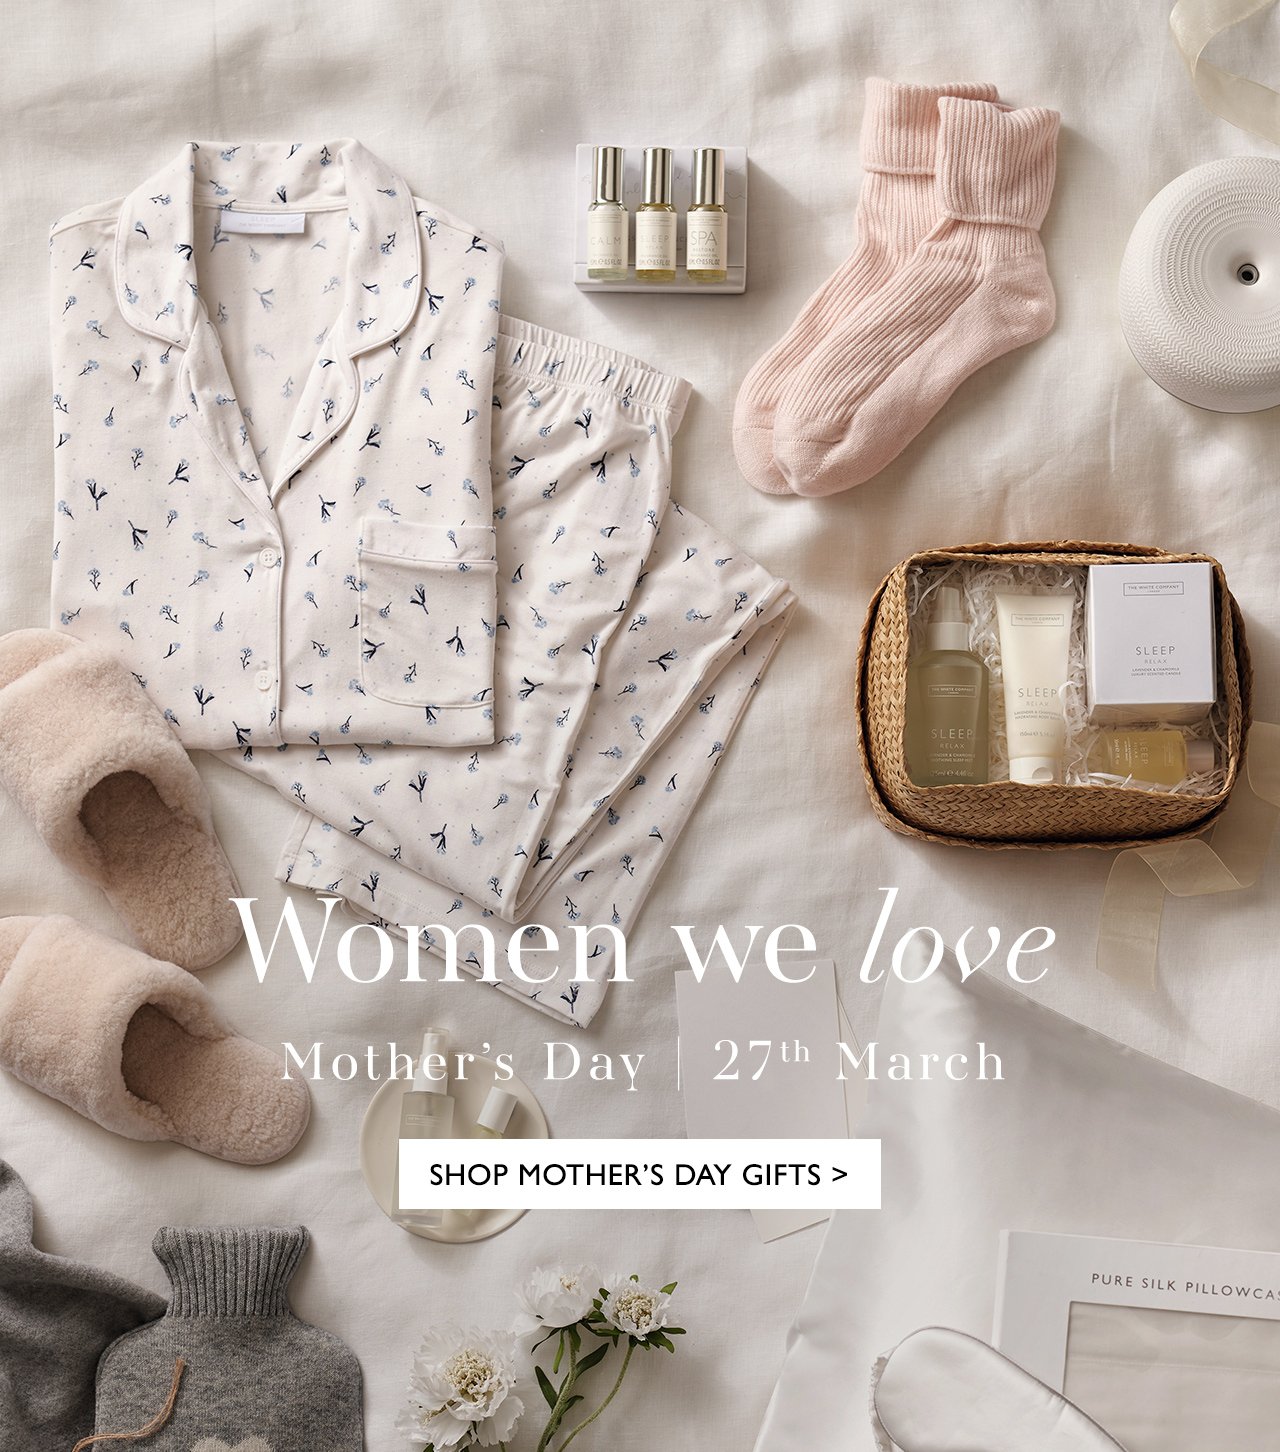 Women we love | SHOP MOTHER'S DAY GIFTS